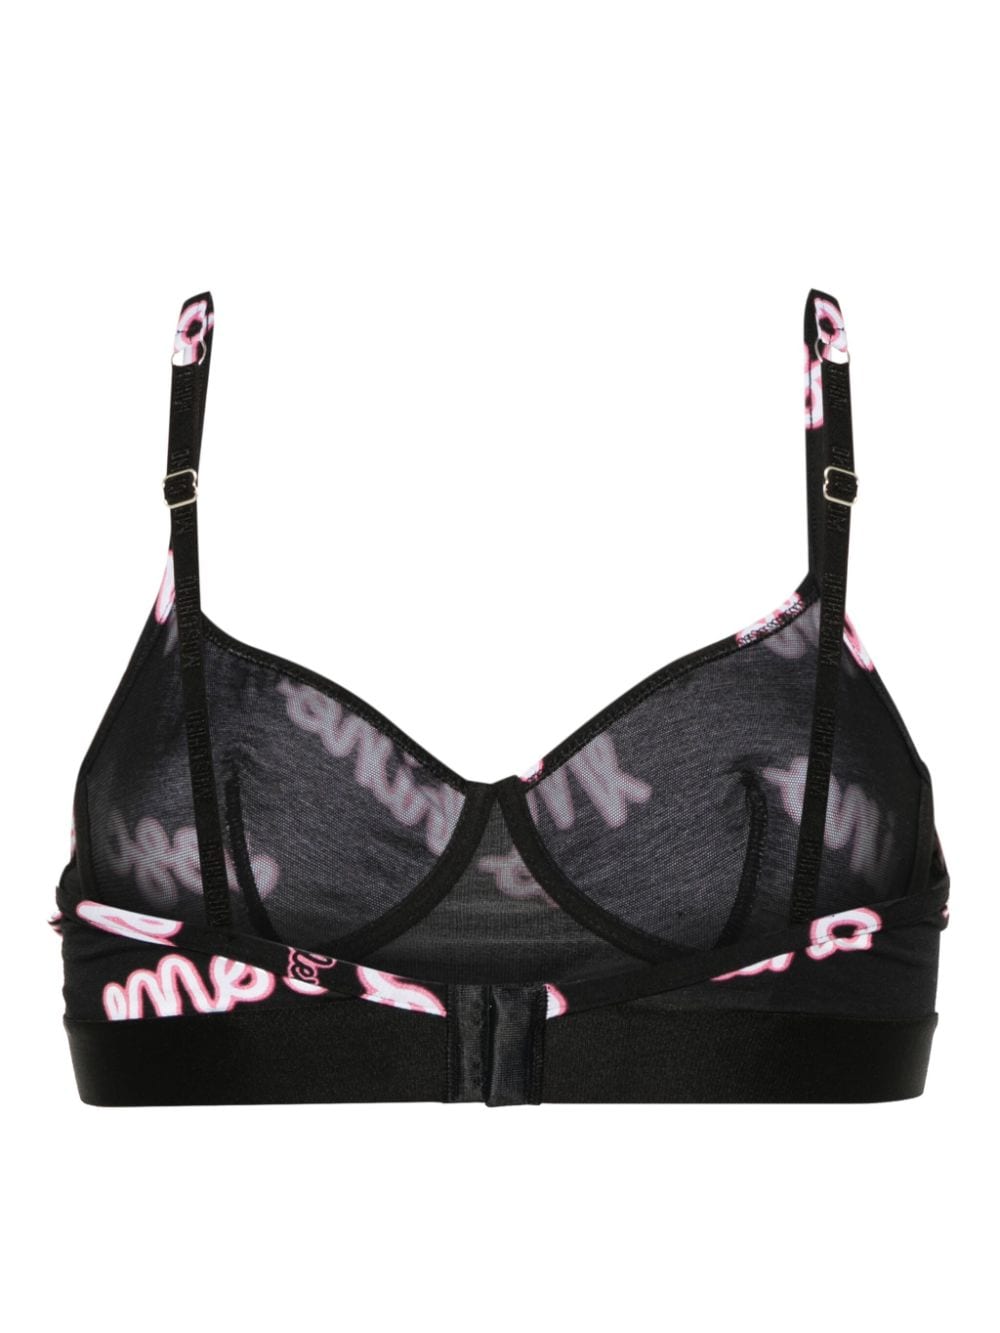 Moschino Bra with logo, StclaircomoShops, the shirt can now be purchased  at